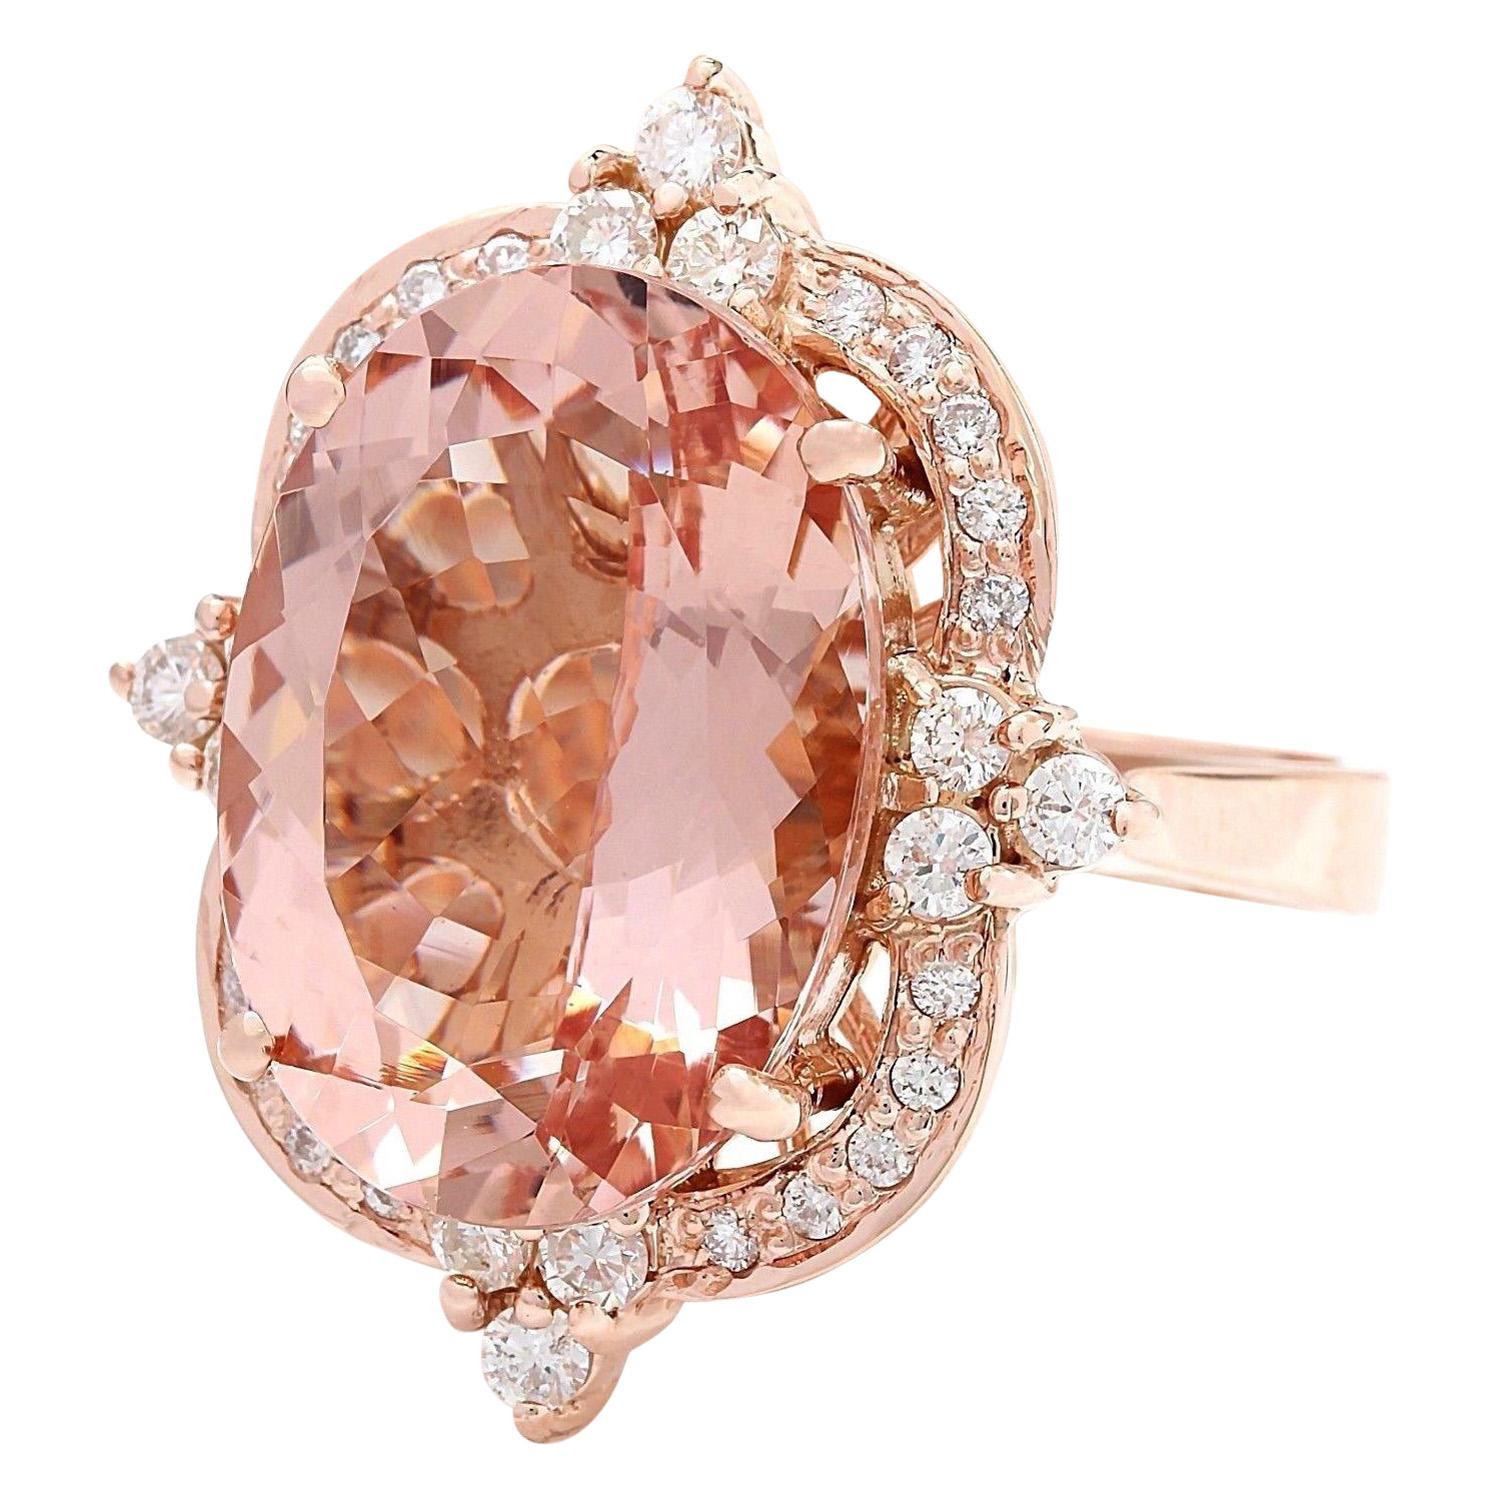 12.16 Carat Natural Morganite 14K Solid Rose Gold Diamond Ring
 Item Type: Ring
 Item Style: Cocktail
 Material: 14K Rose Gold
 Mainstone: Morganite
 Stone Color: Peach
 Stone Weight: 11.36 Carat
 Stone Shape: Oval
 Stone Quantity: 1
 Stone